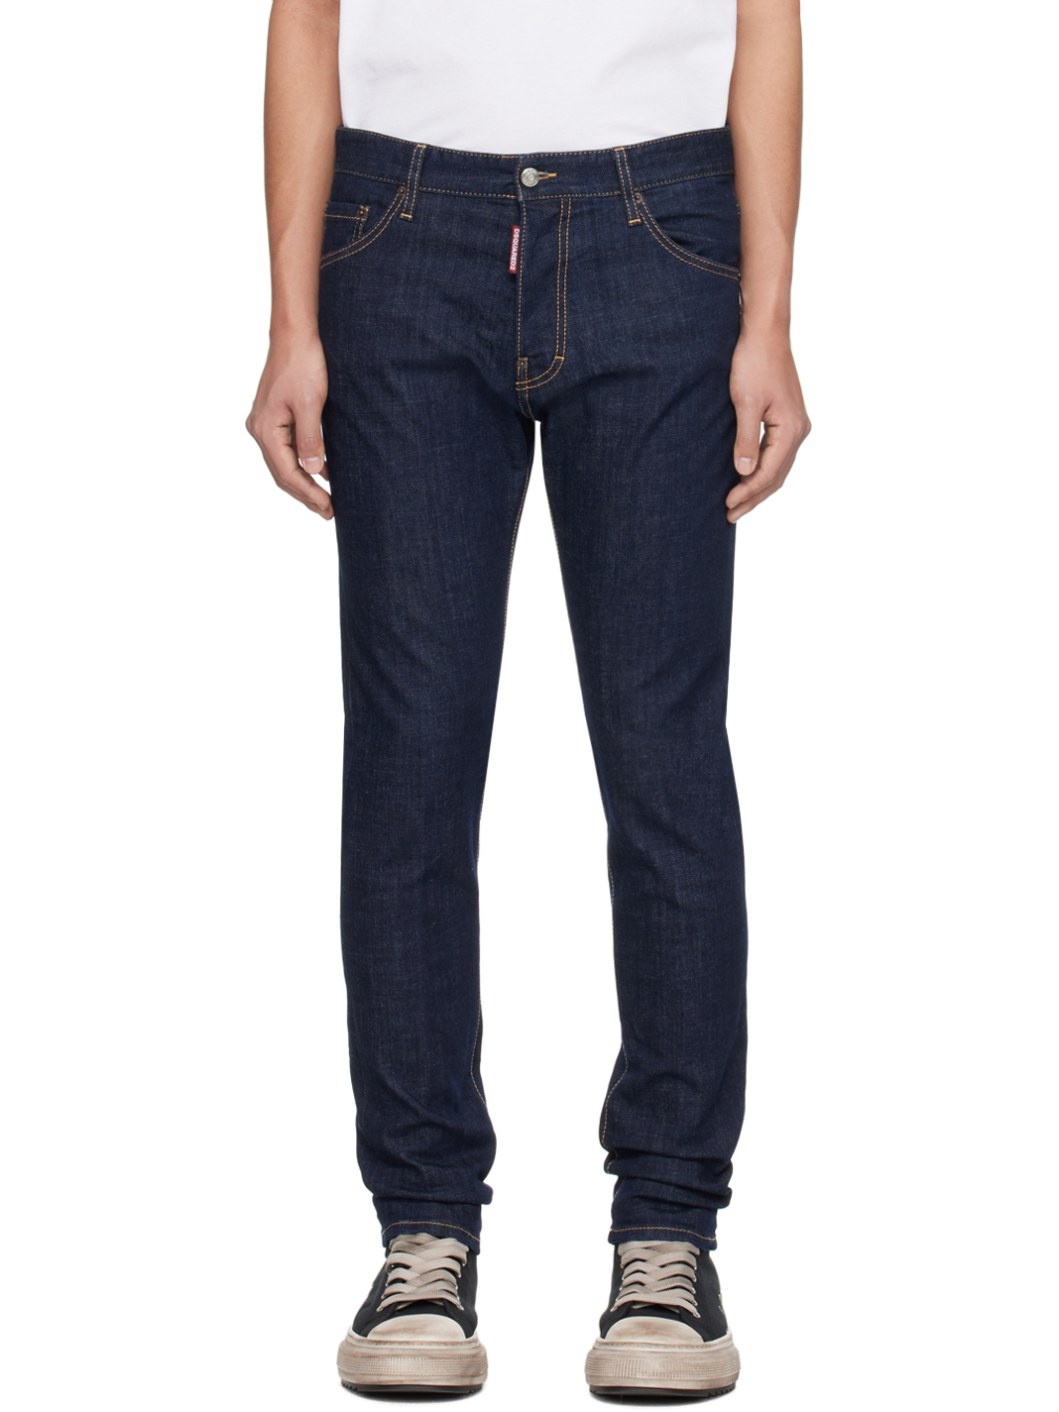 Navy Cool Guy Jeans - 1